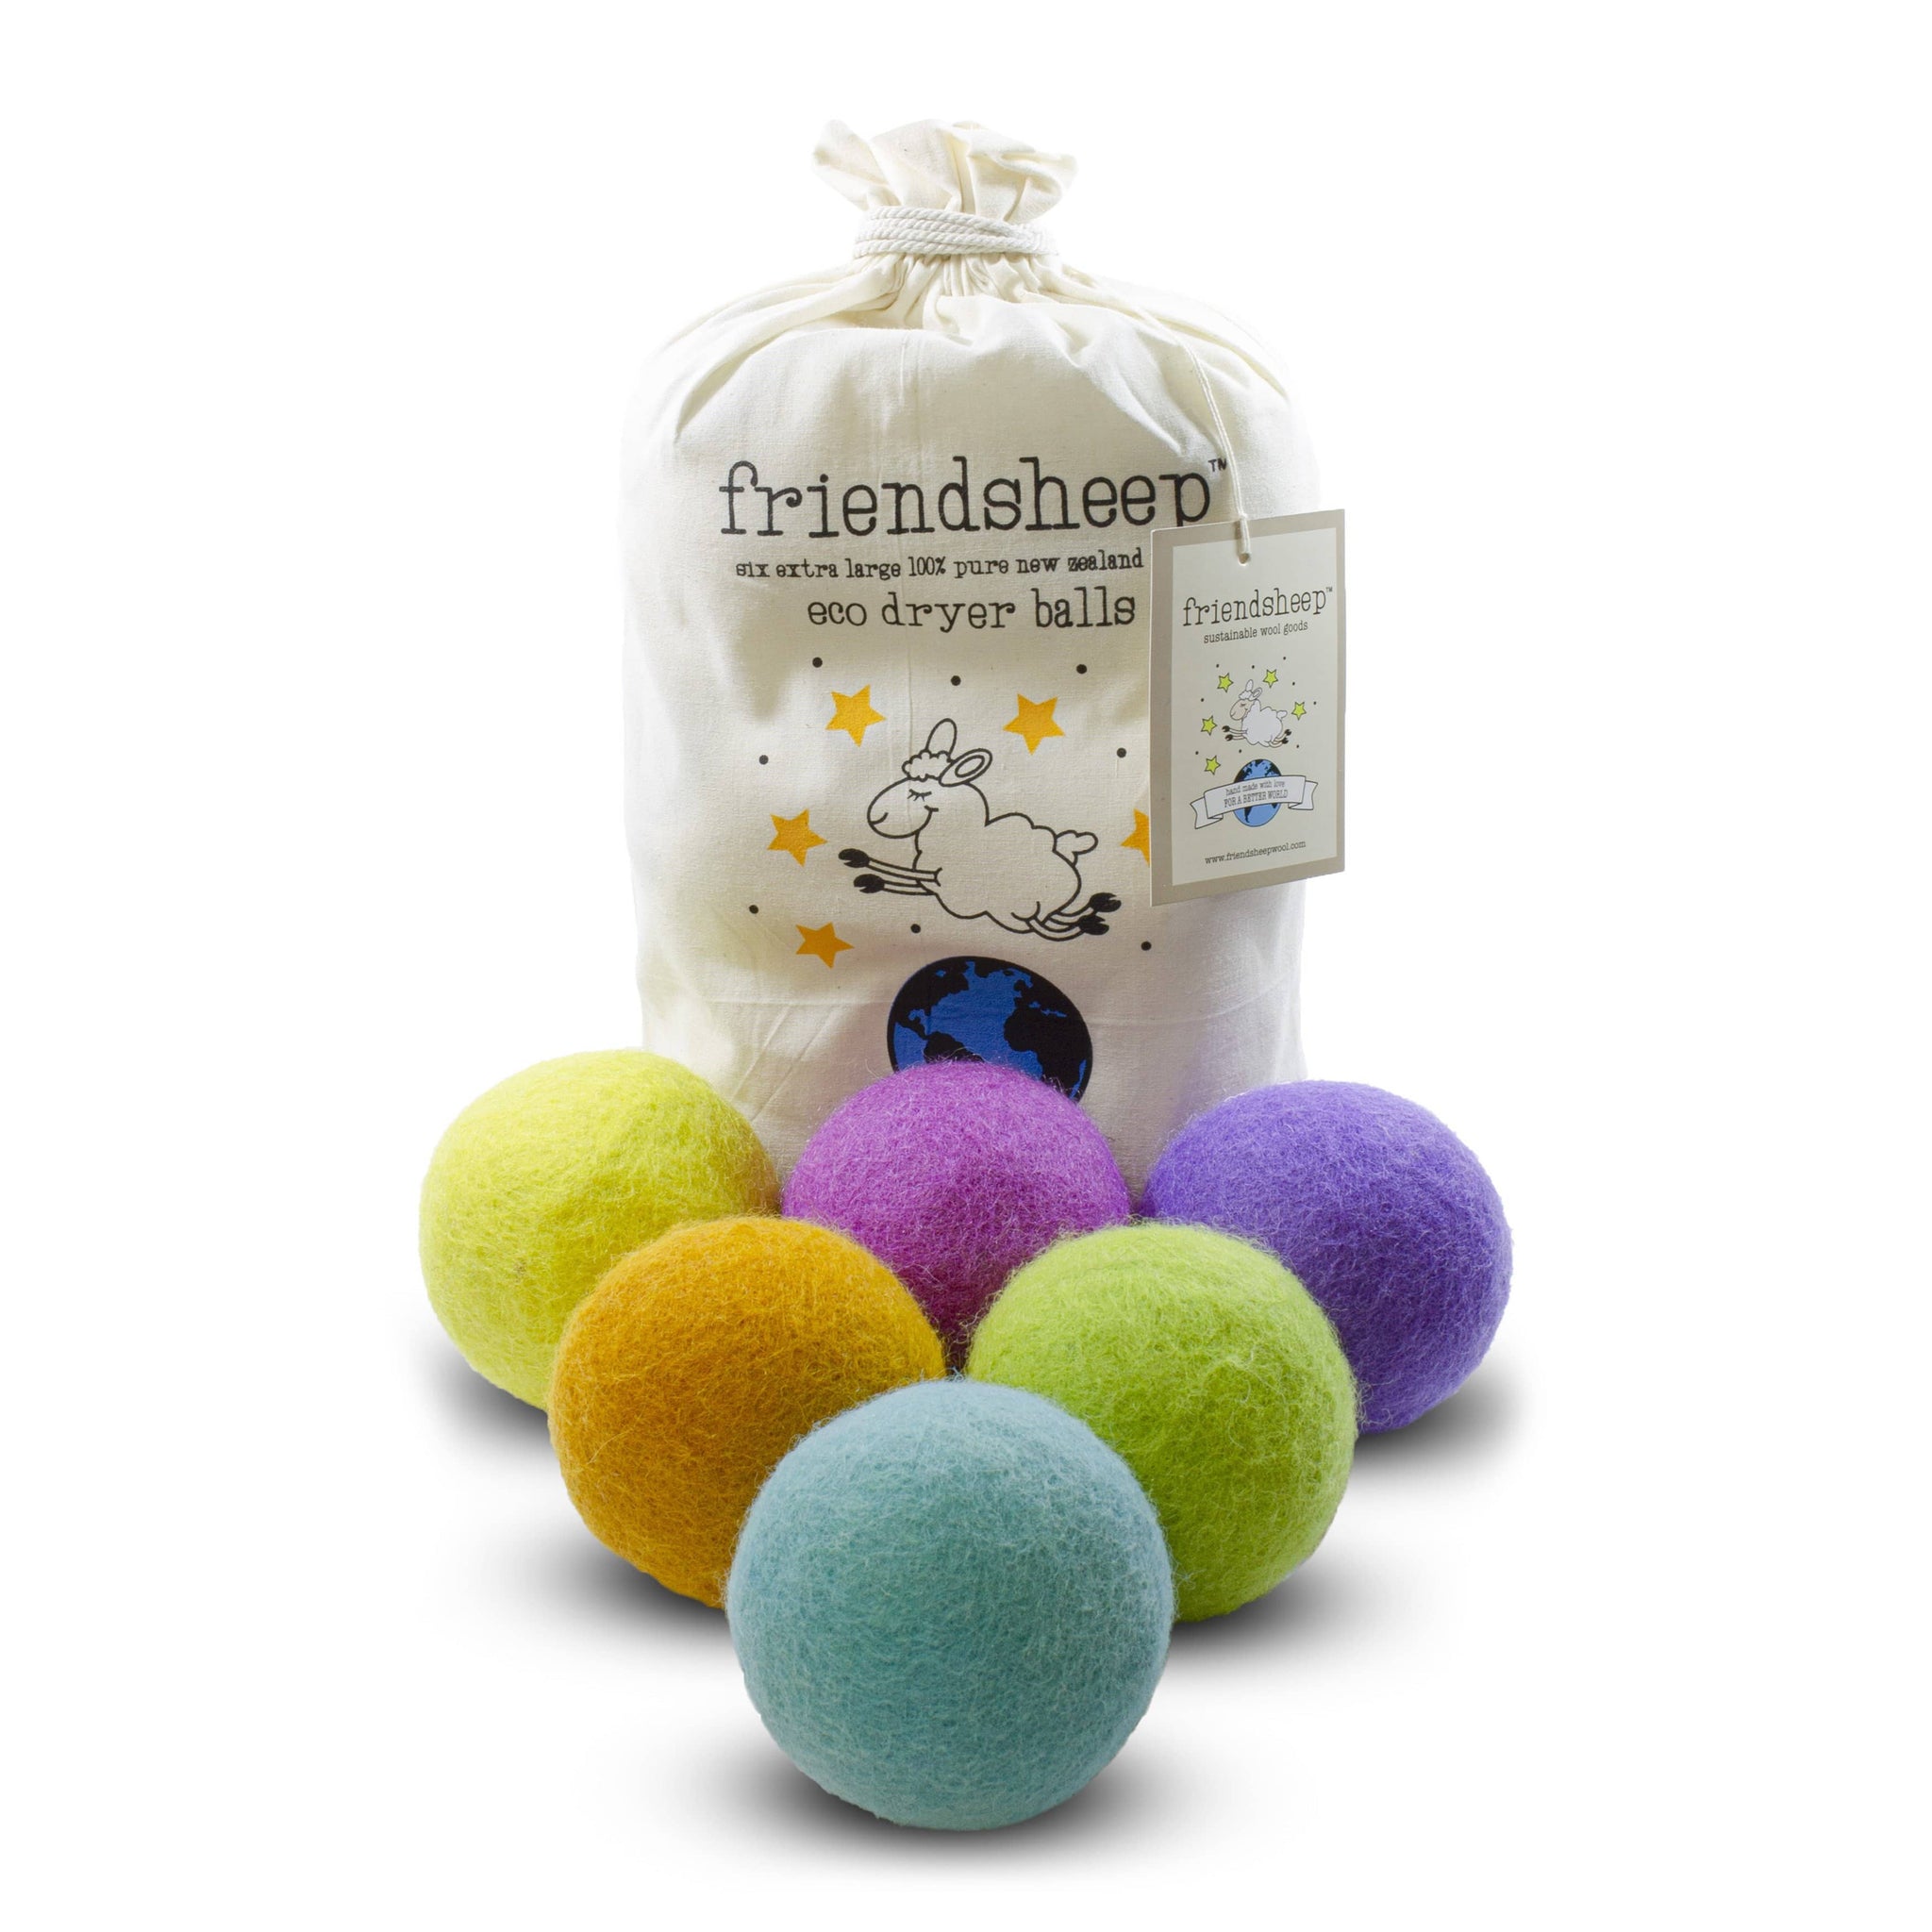 These dryer balls keep my laundry static- and wrinkle-free